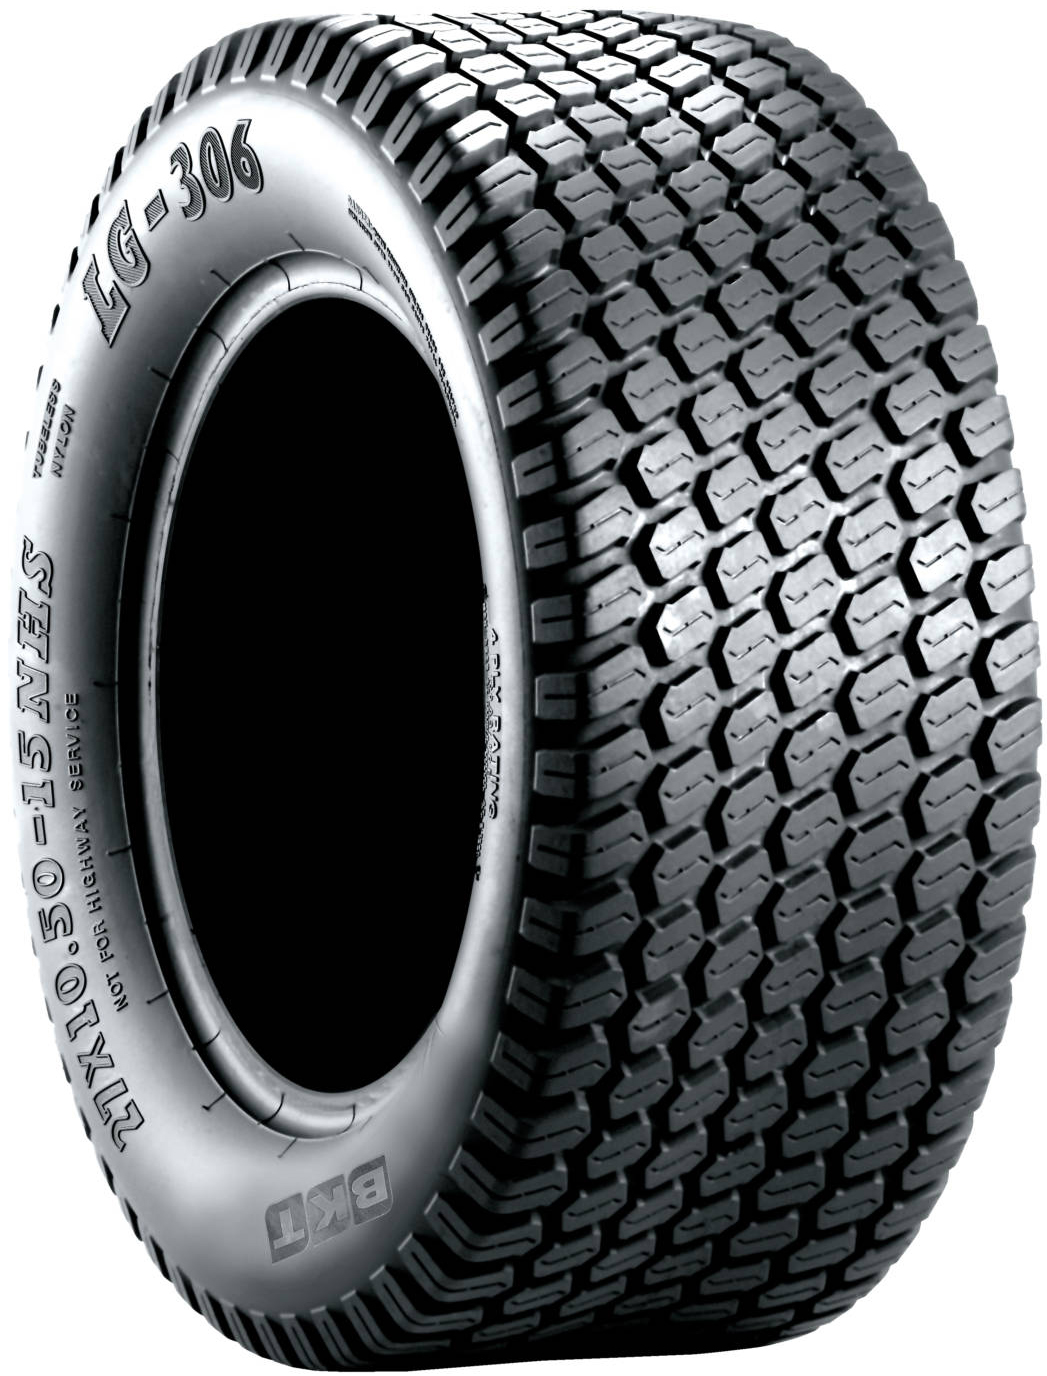 product_type-industrial_tires BKT LG-306 10 TL 15.5 R16.5